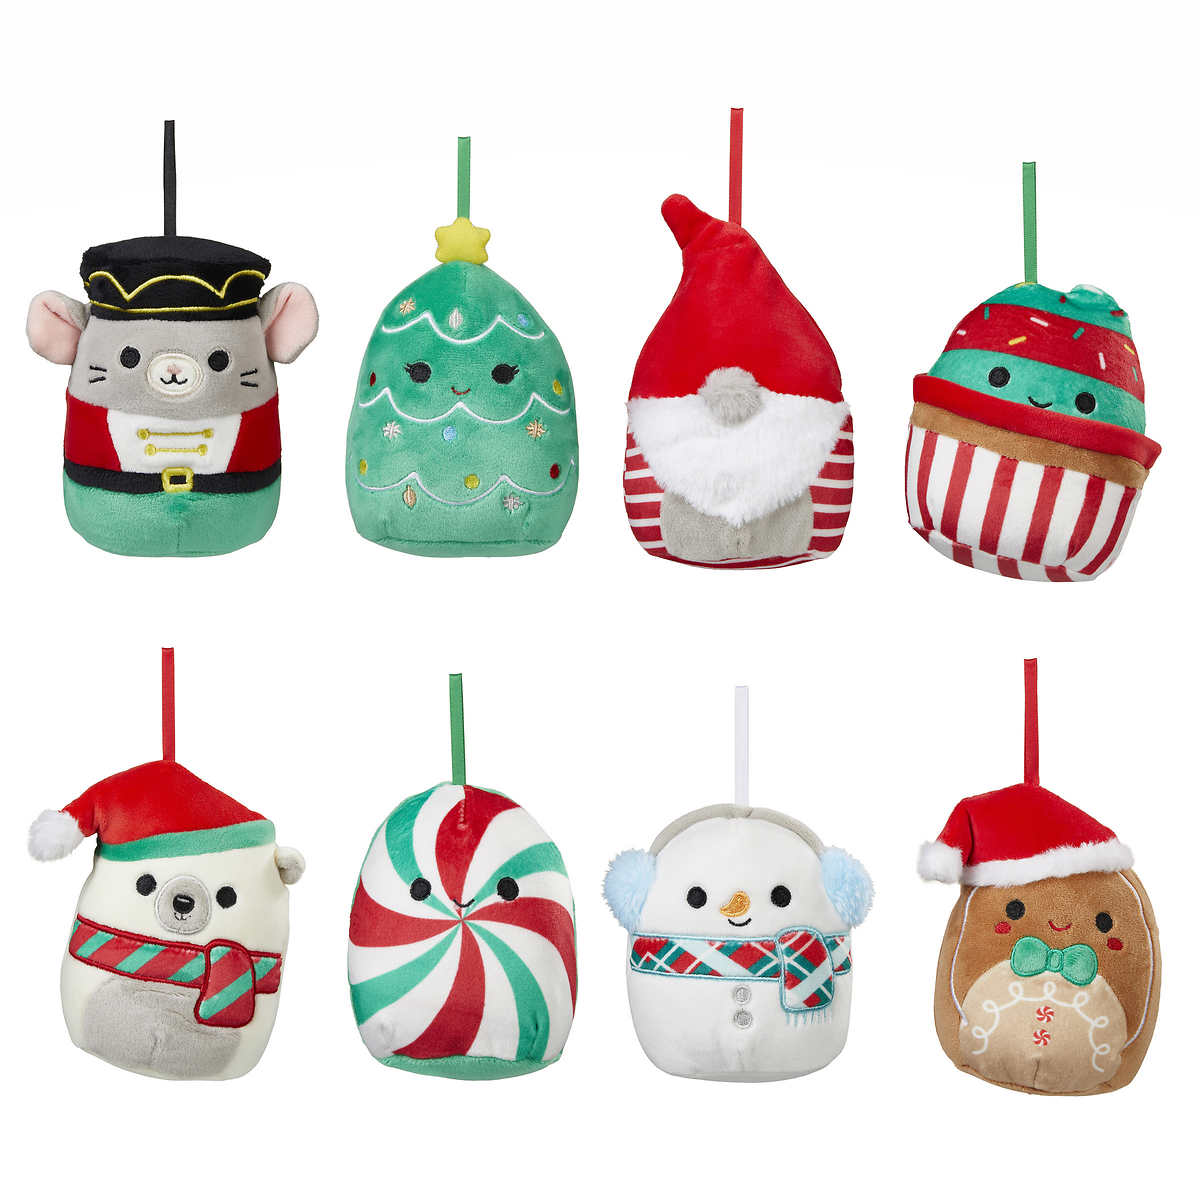 Costco Members: 8-Pack 4” Squishmallow Ornaments (Holiday Winter)